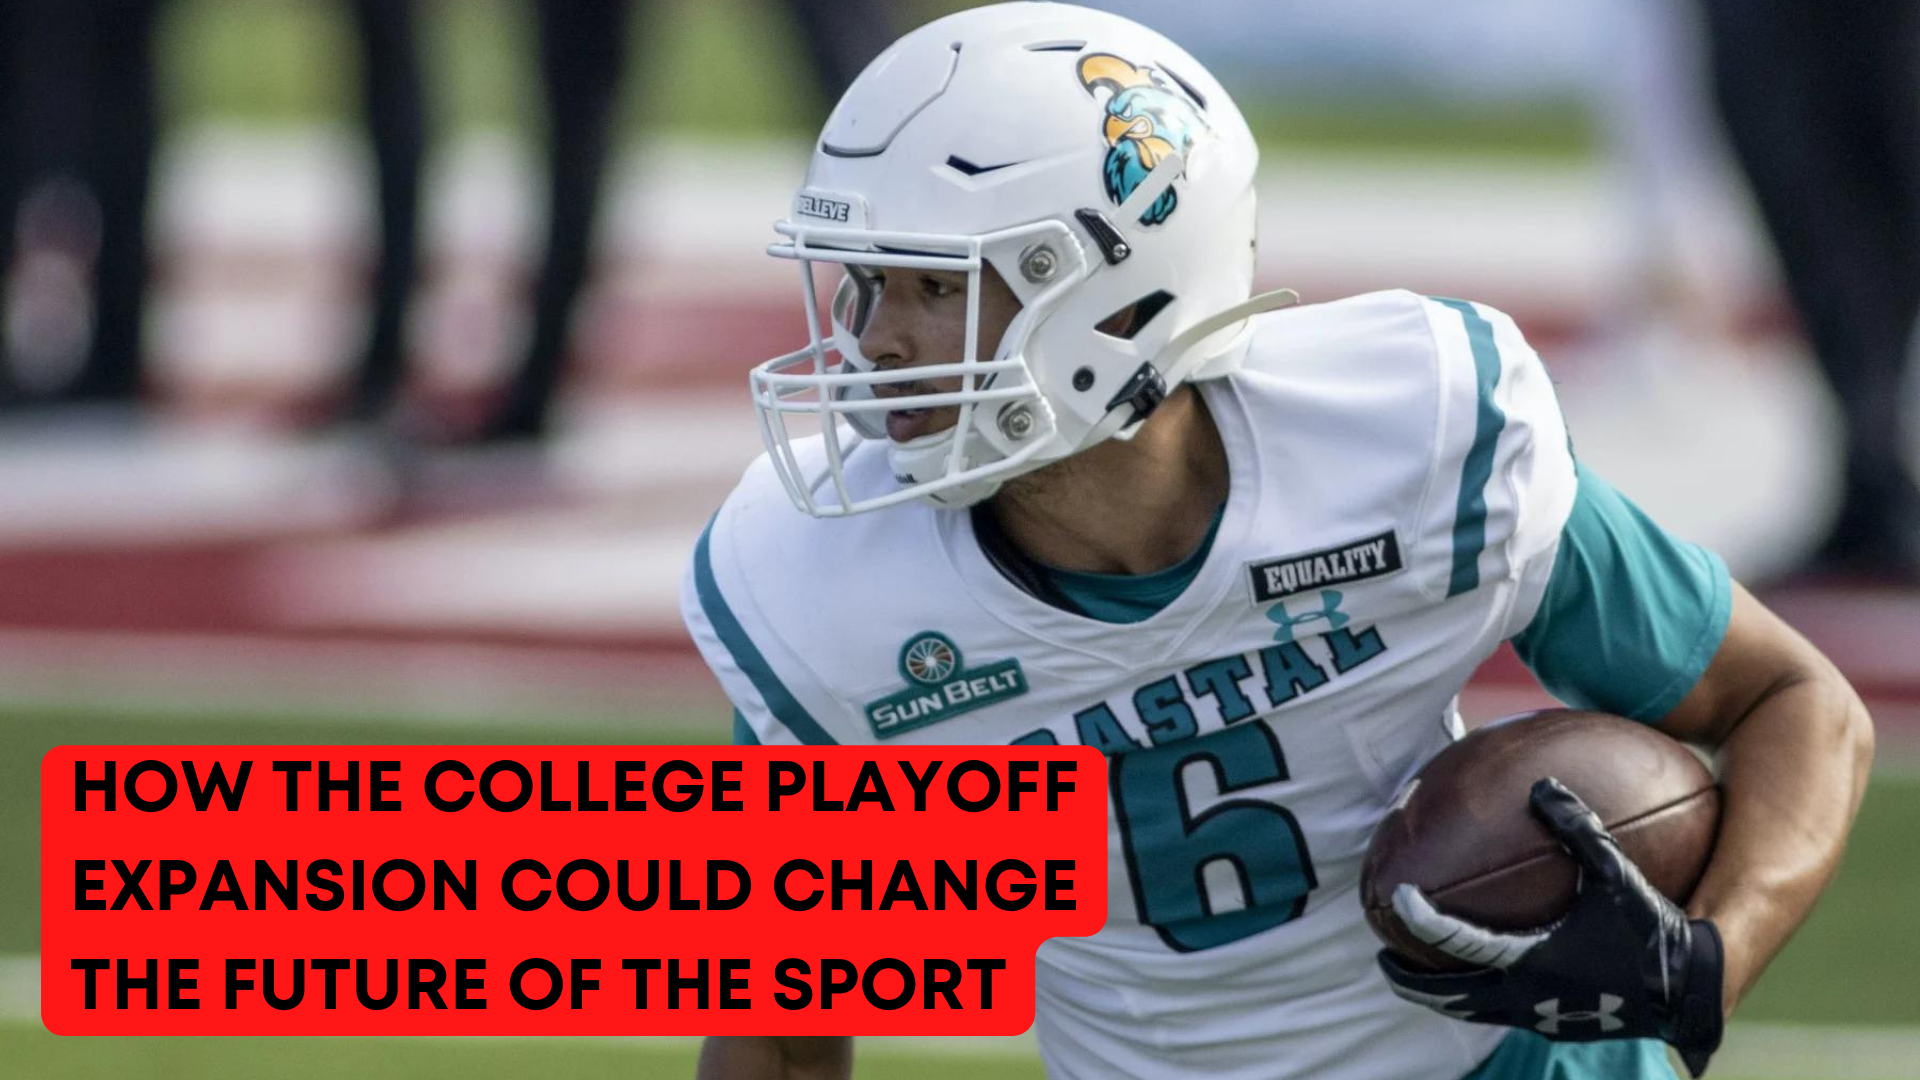 How The College Playoff Expansion Could Change The Future Of The Sport